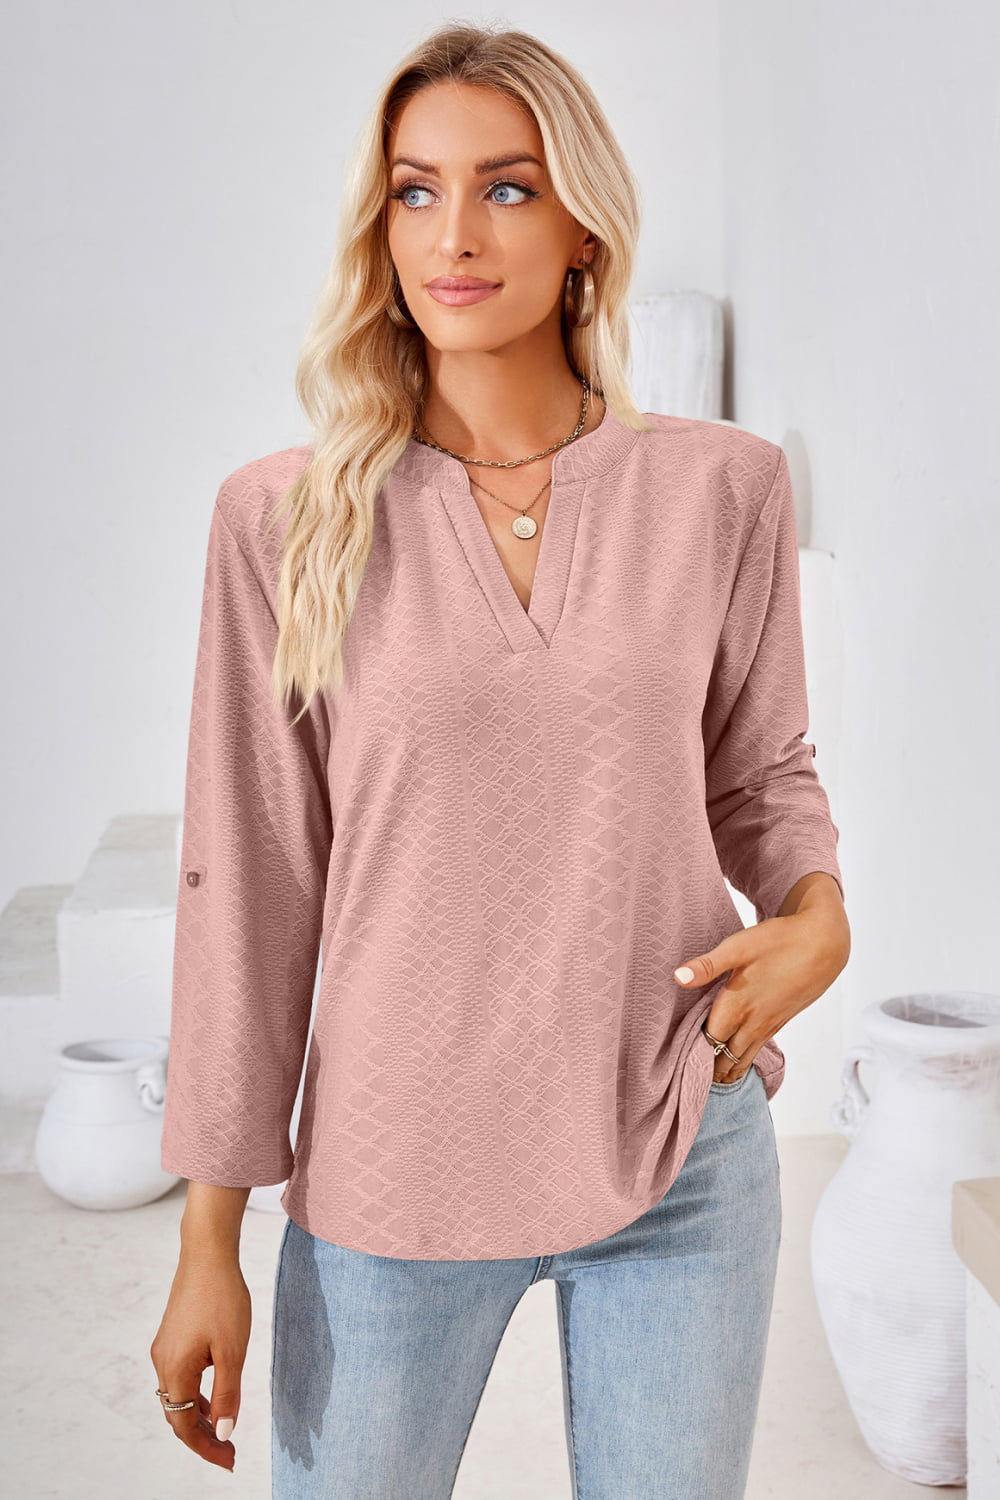 V-Neck Roll-Tap Sleeve Blouse - Pink / S - Women’s Clothing & Accessories - Shirts & Tops - 16 - 2024